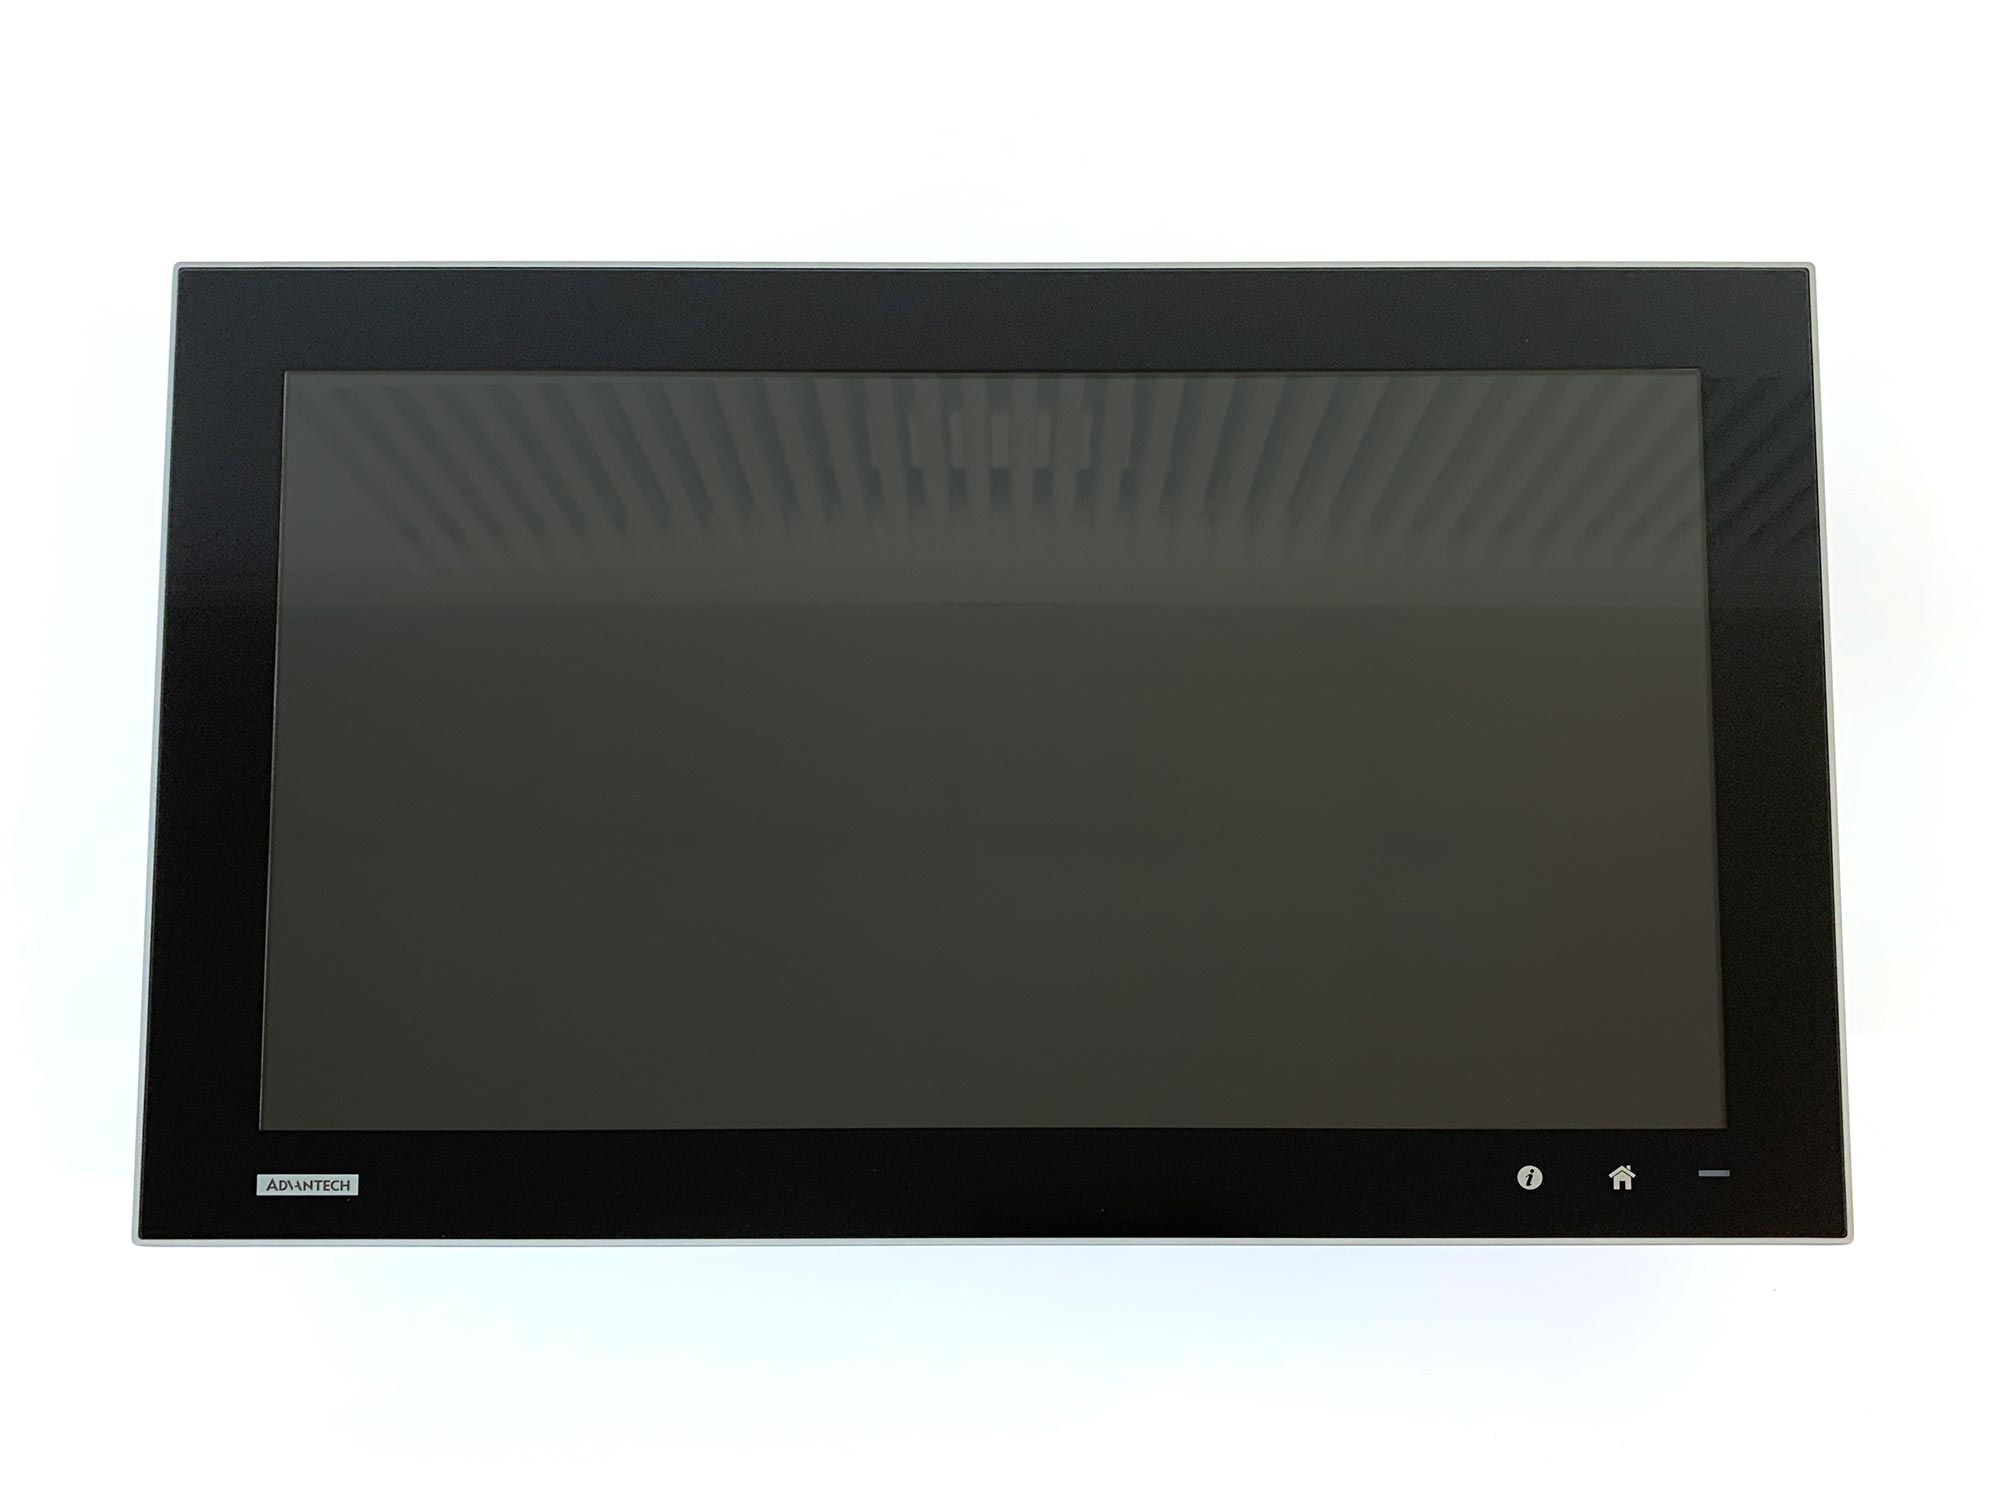 TPC-5212W - Modularer Touch-Panel PC mit 21,5-Zoll Display